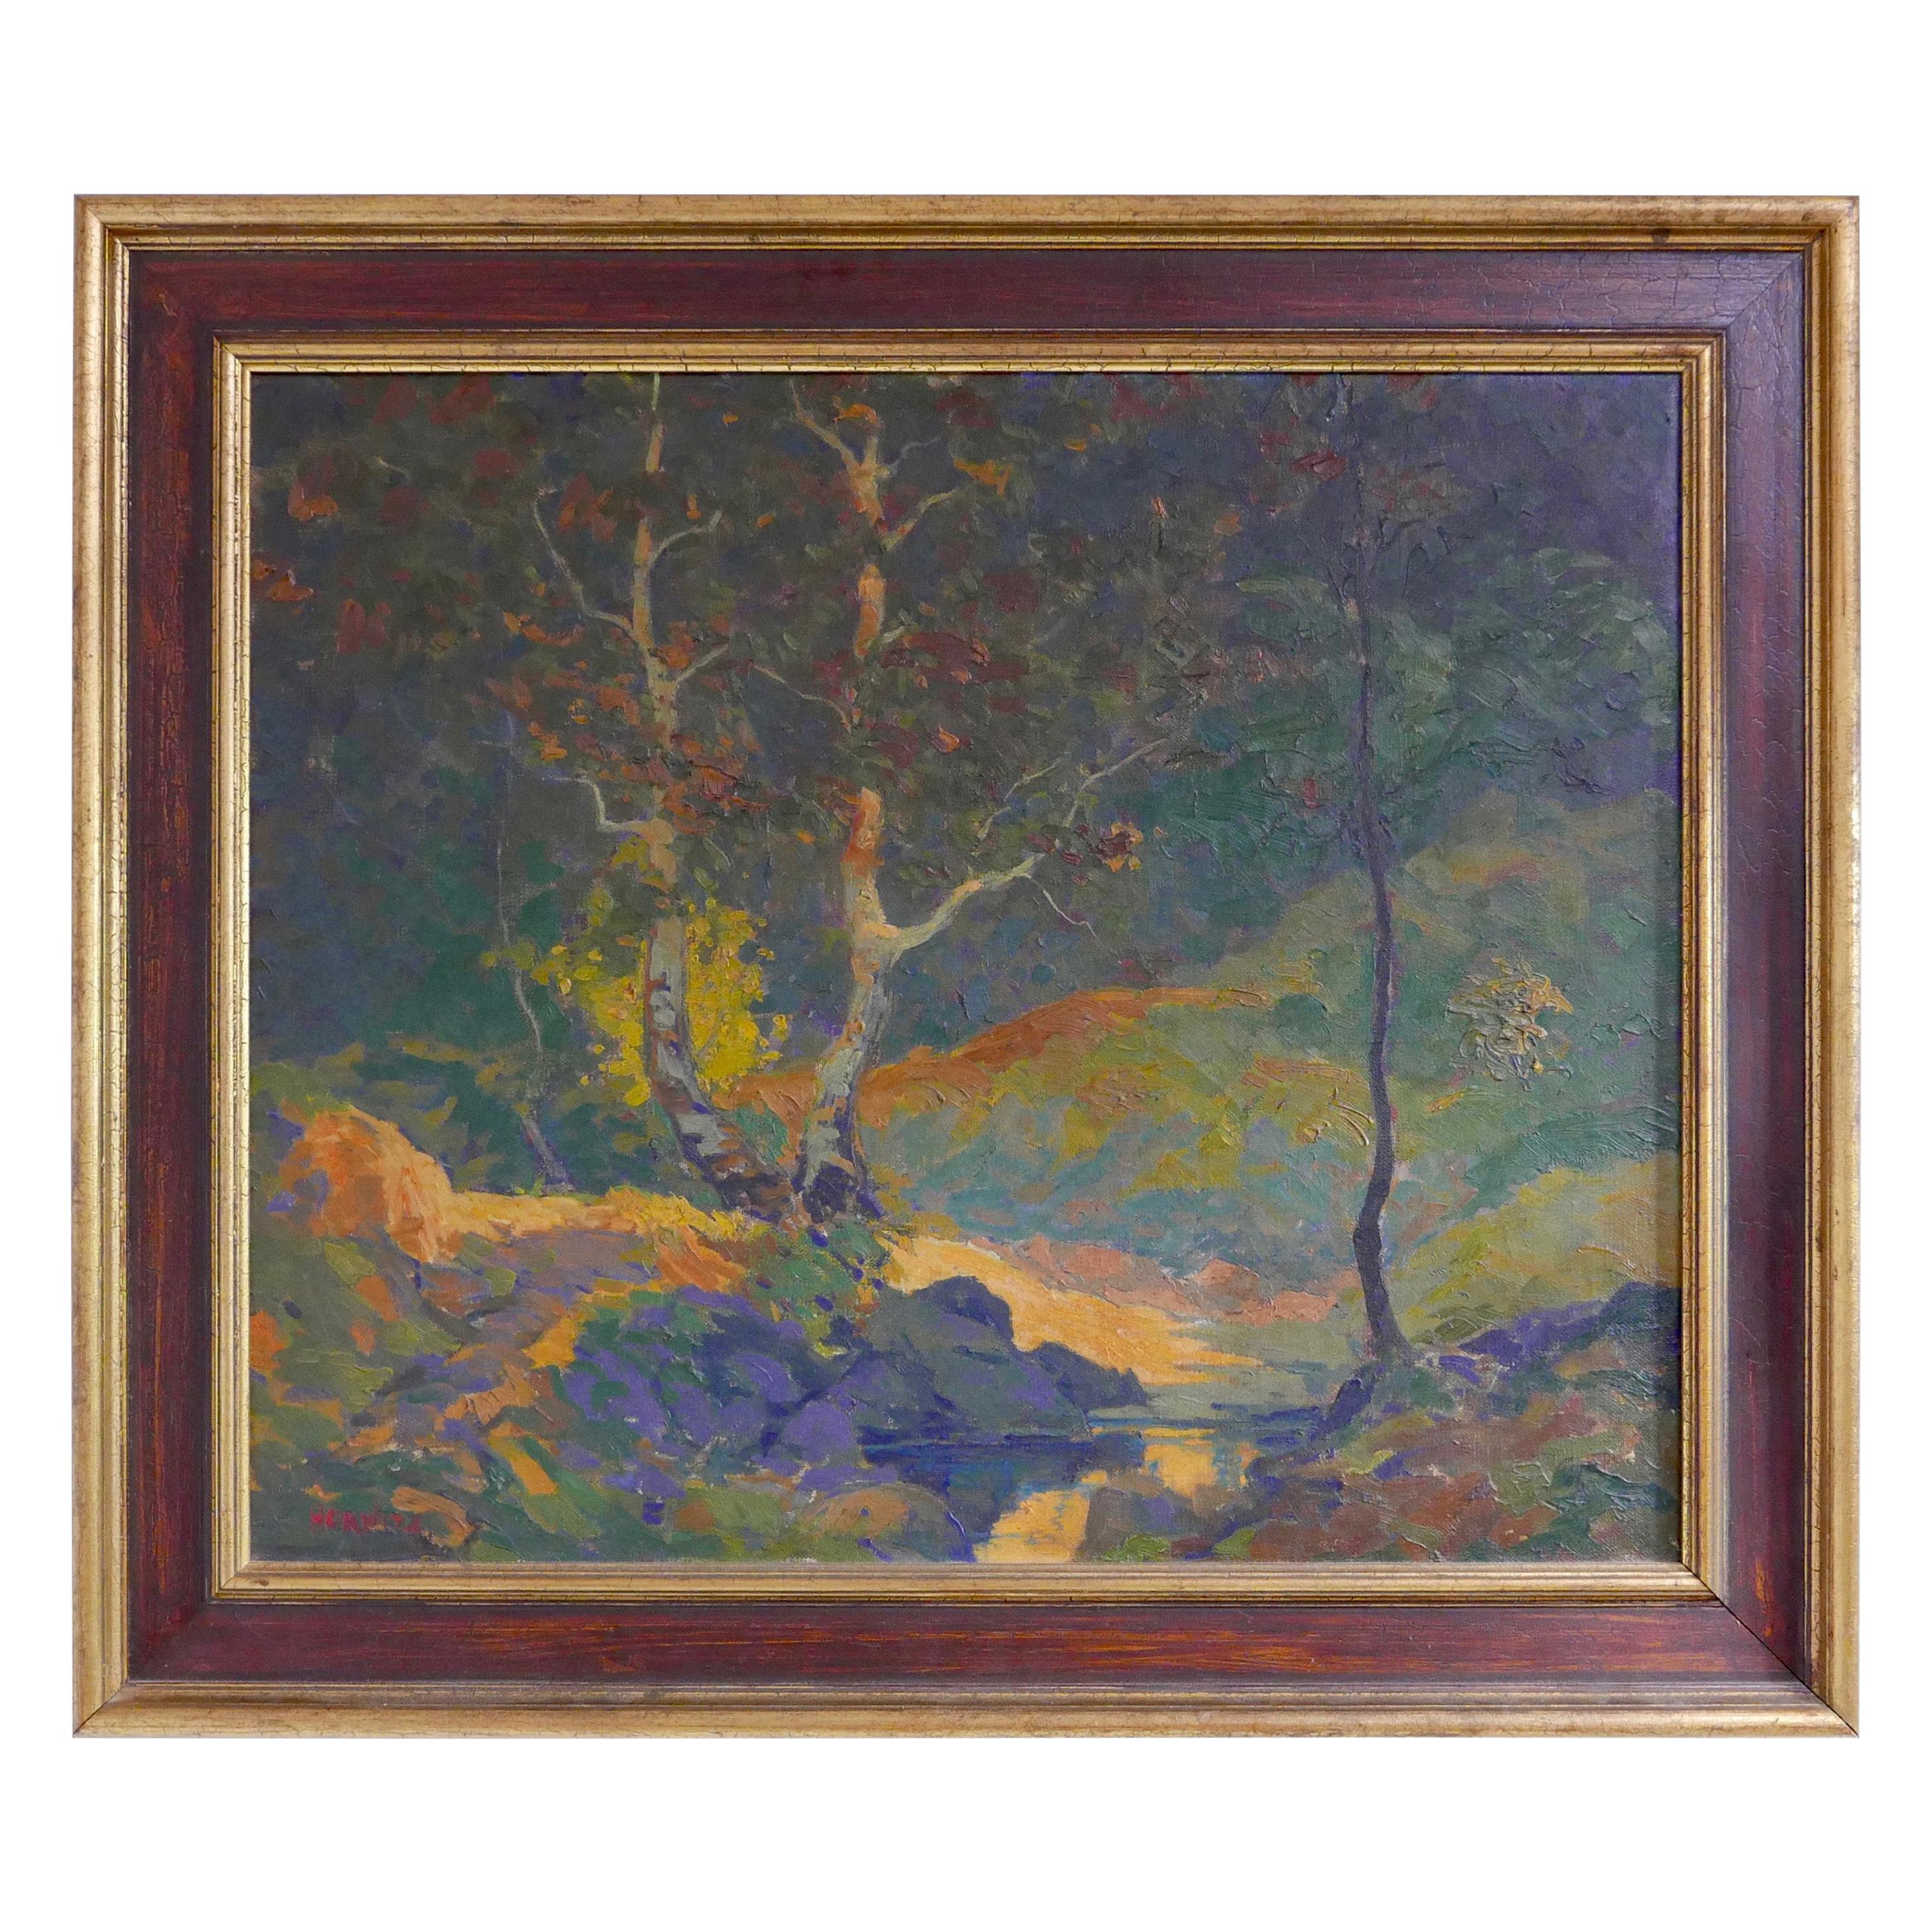 Abstract/ Impressionist Landscape by Russian/American William N. Horwitz, c 1924